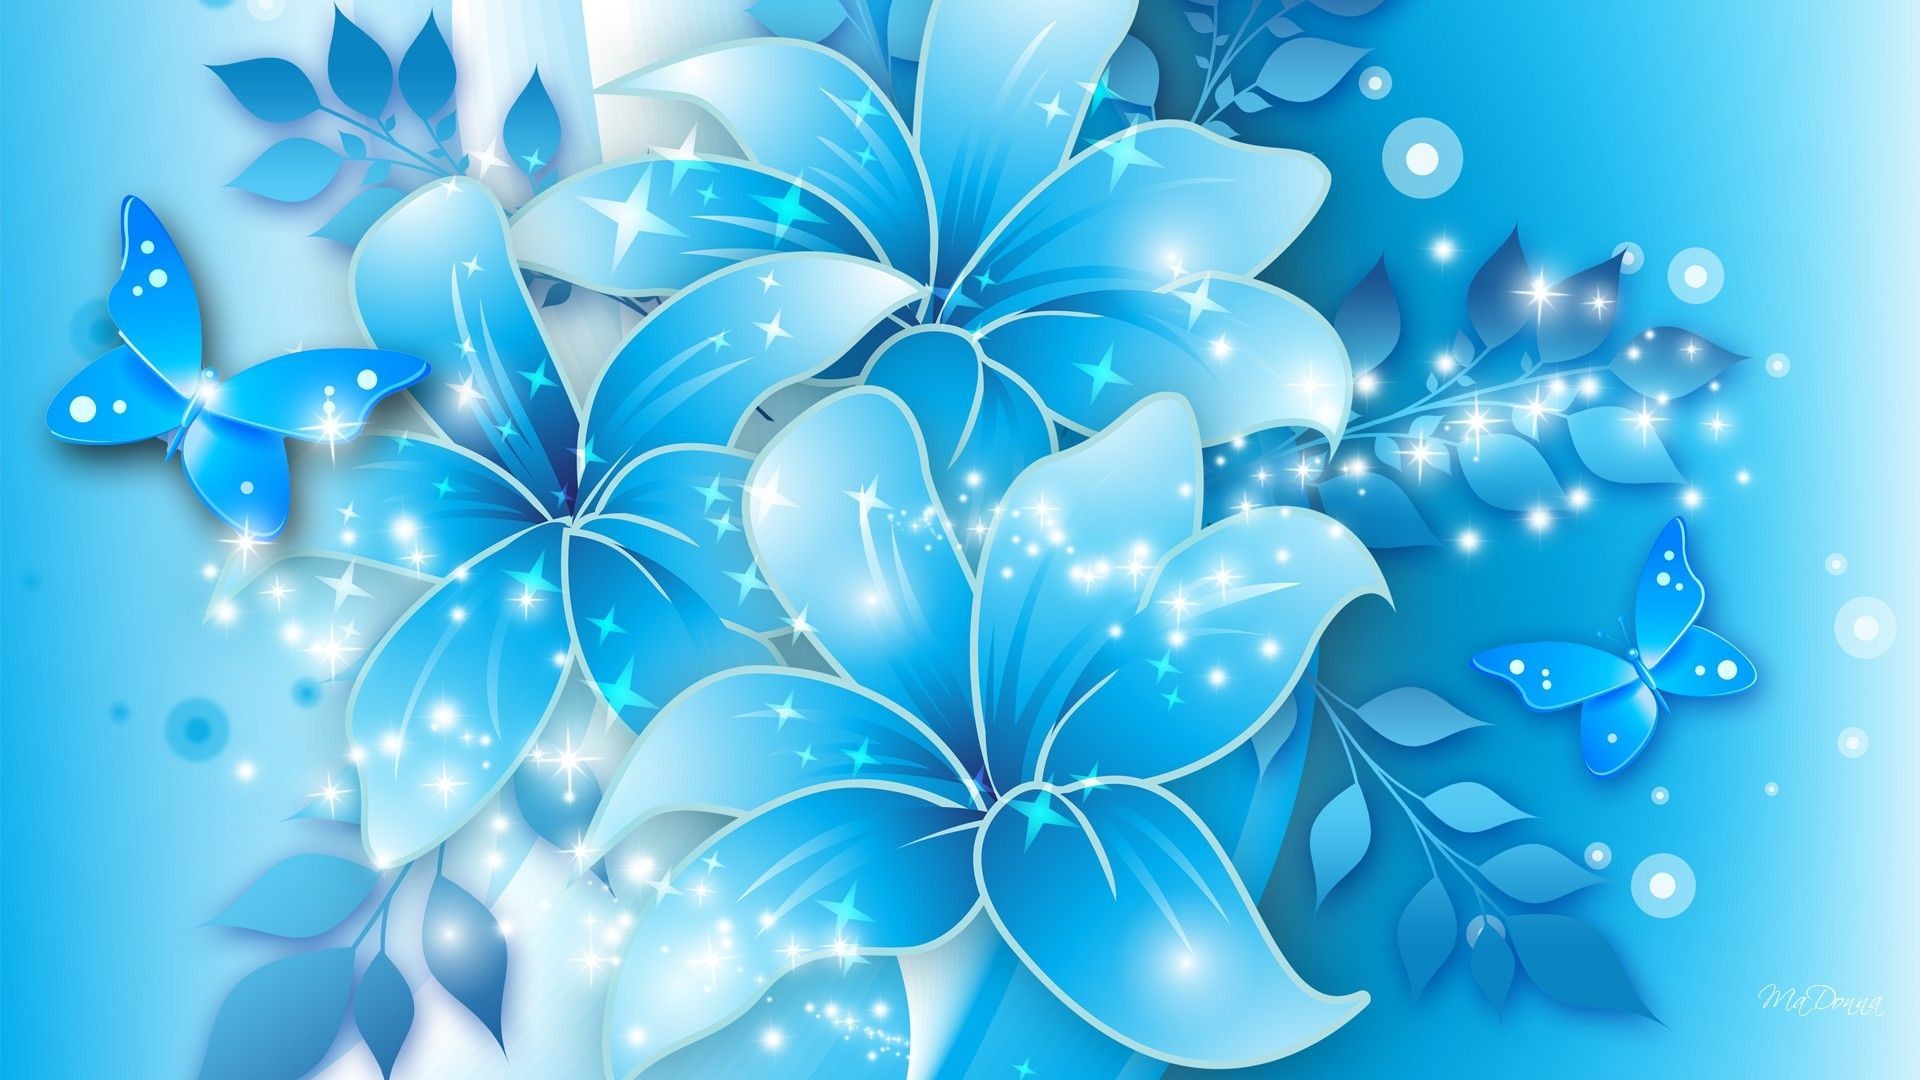 Blue Flowers Background (53+ pictures)